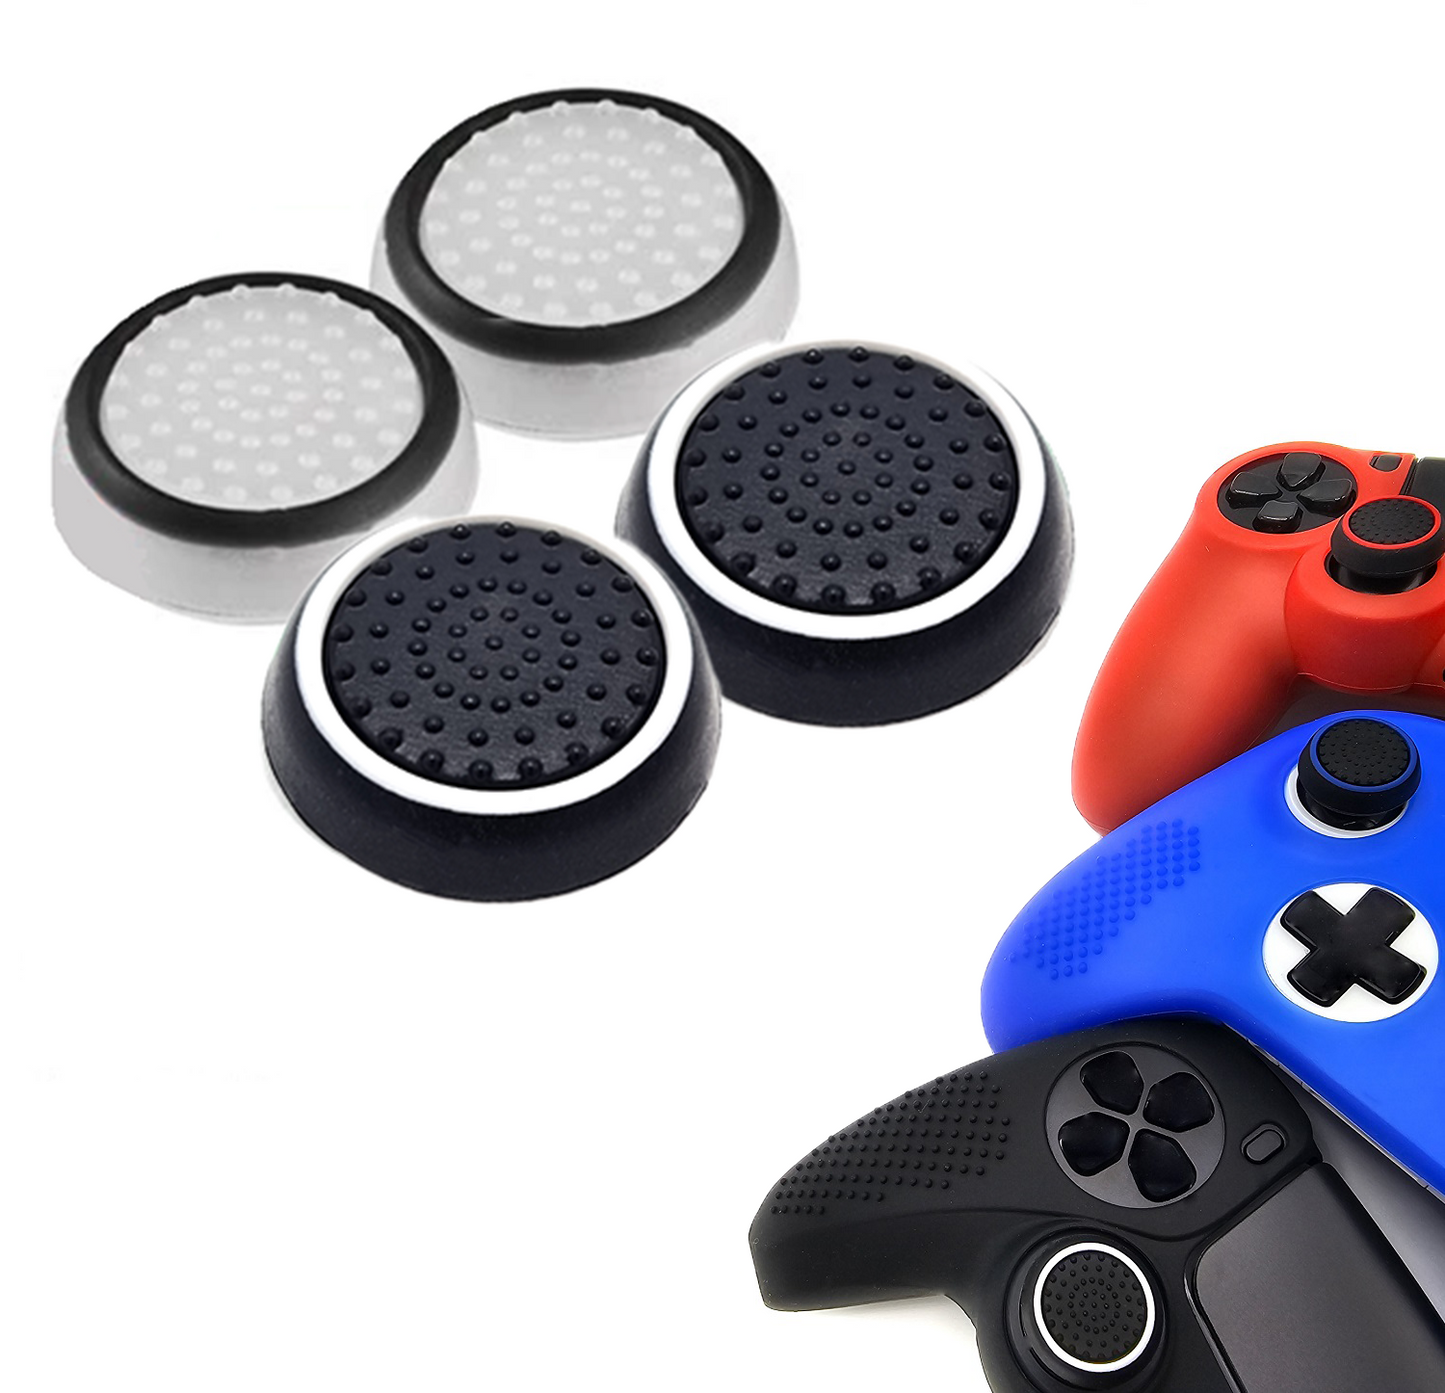 Gaming Thumb Grips | Performance Anti-slip Thumbsticks | Joystick Cap Thumb Grips | White Black and Black White | Accessories suitable for Playstation PS4 PS5 &amp; Xbox &amp; Nintendo Pro Controller